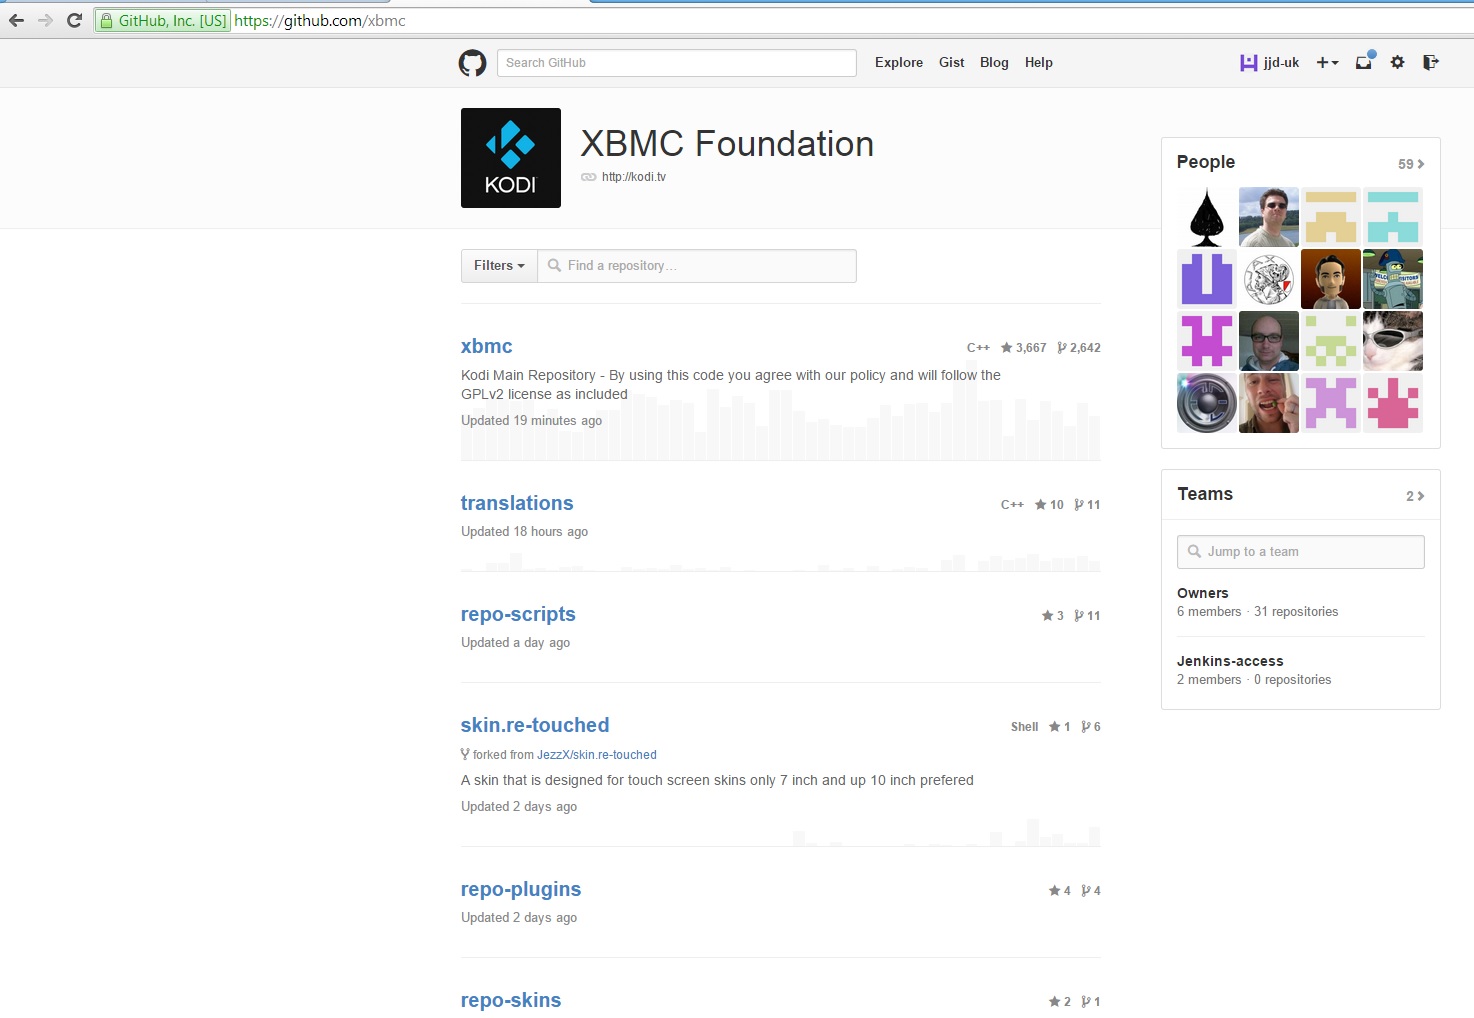 Step 1: From XBMC Foundation page https://github.com/xbmc select "People"